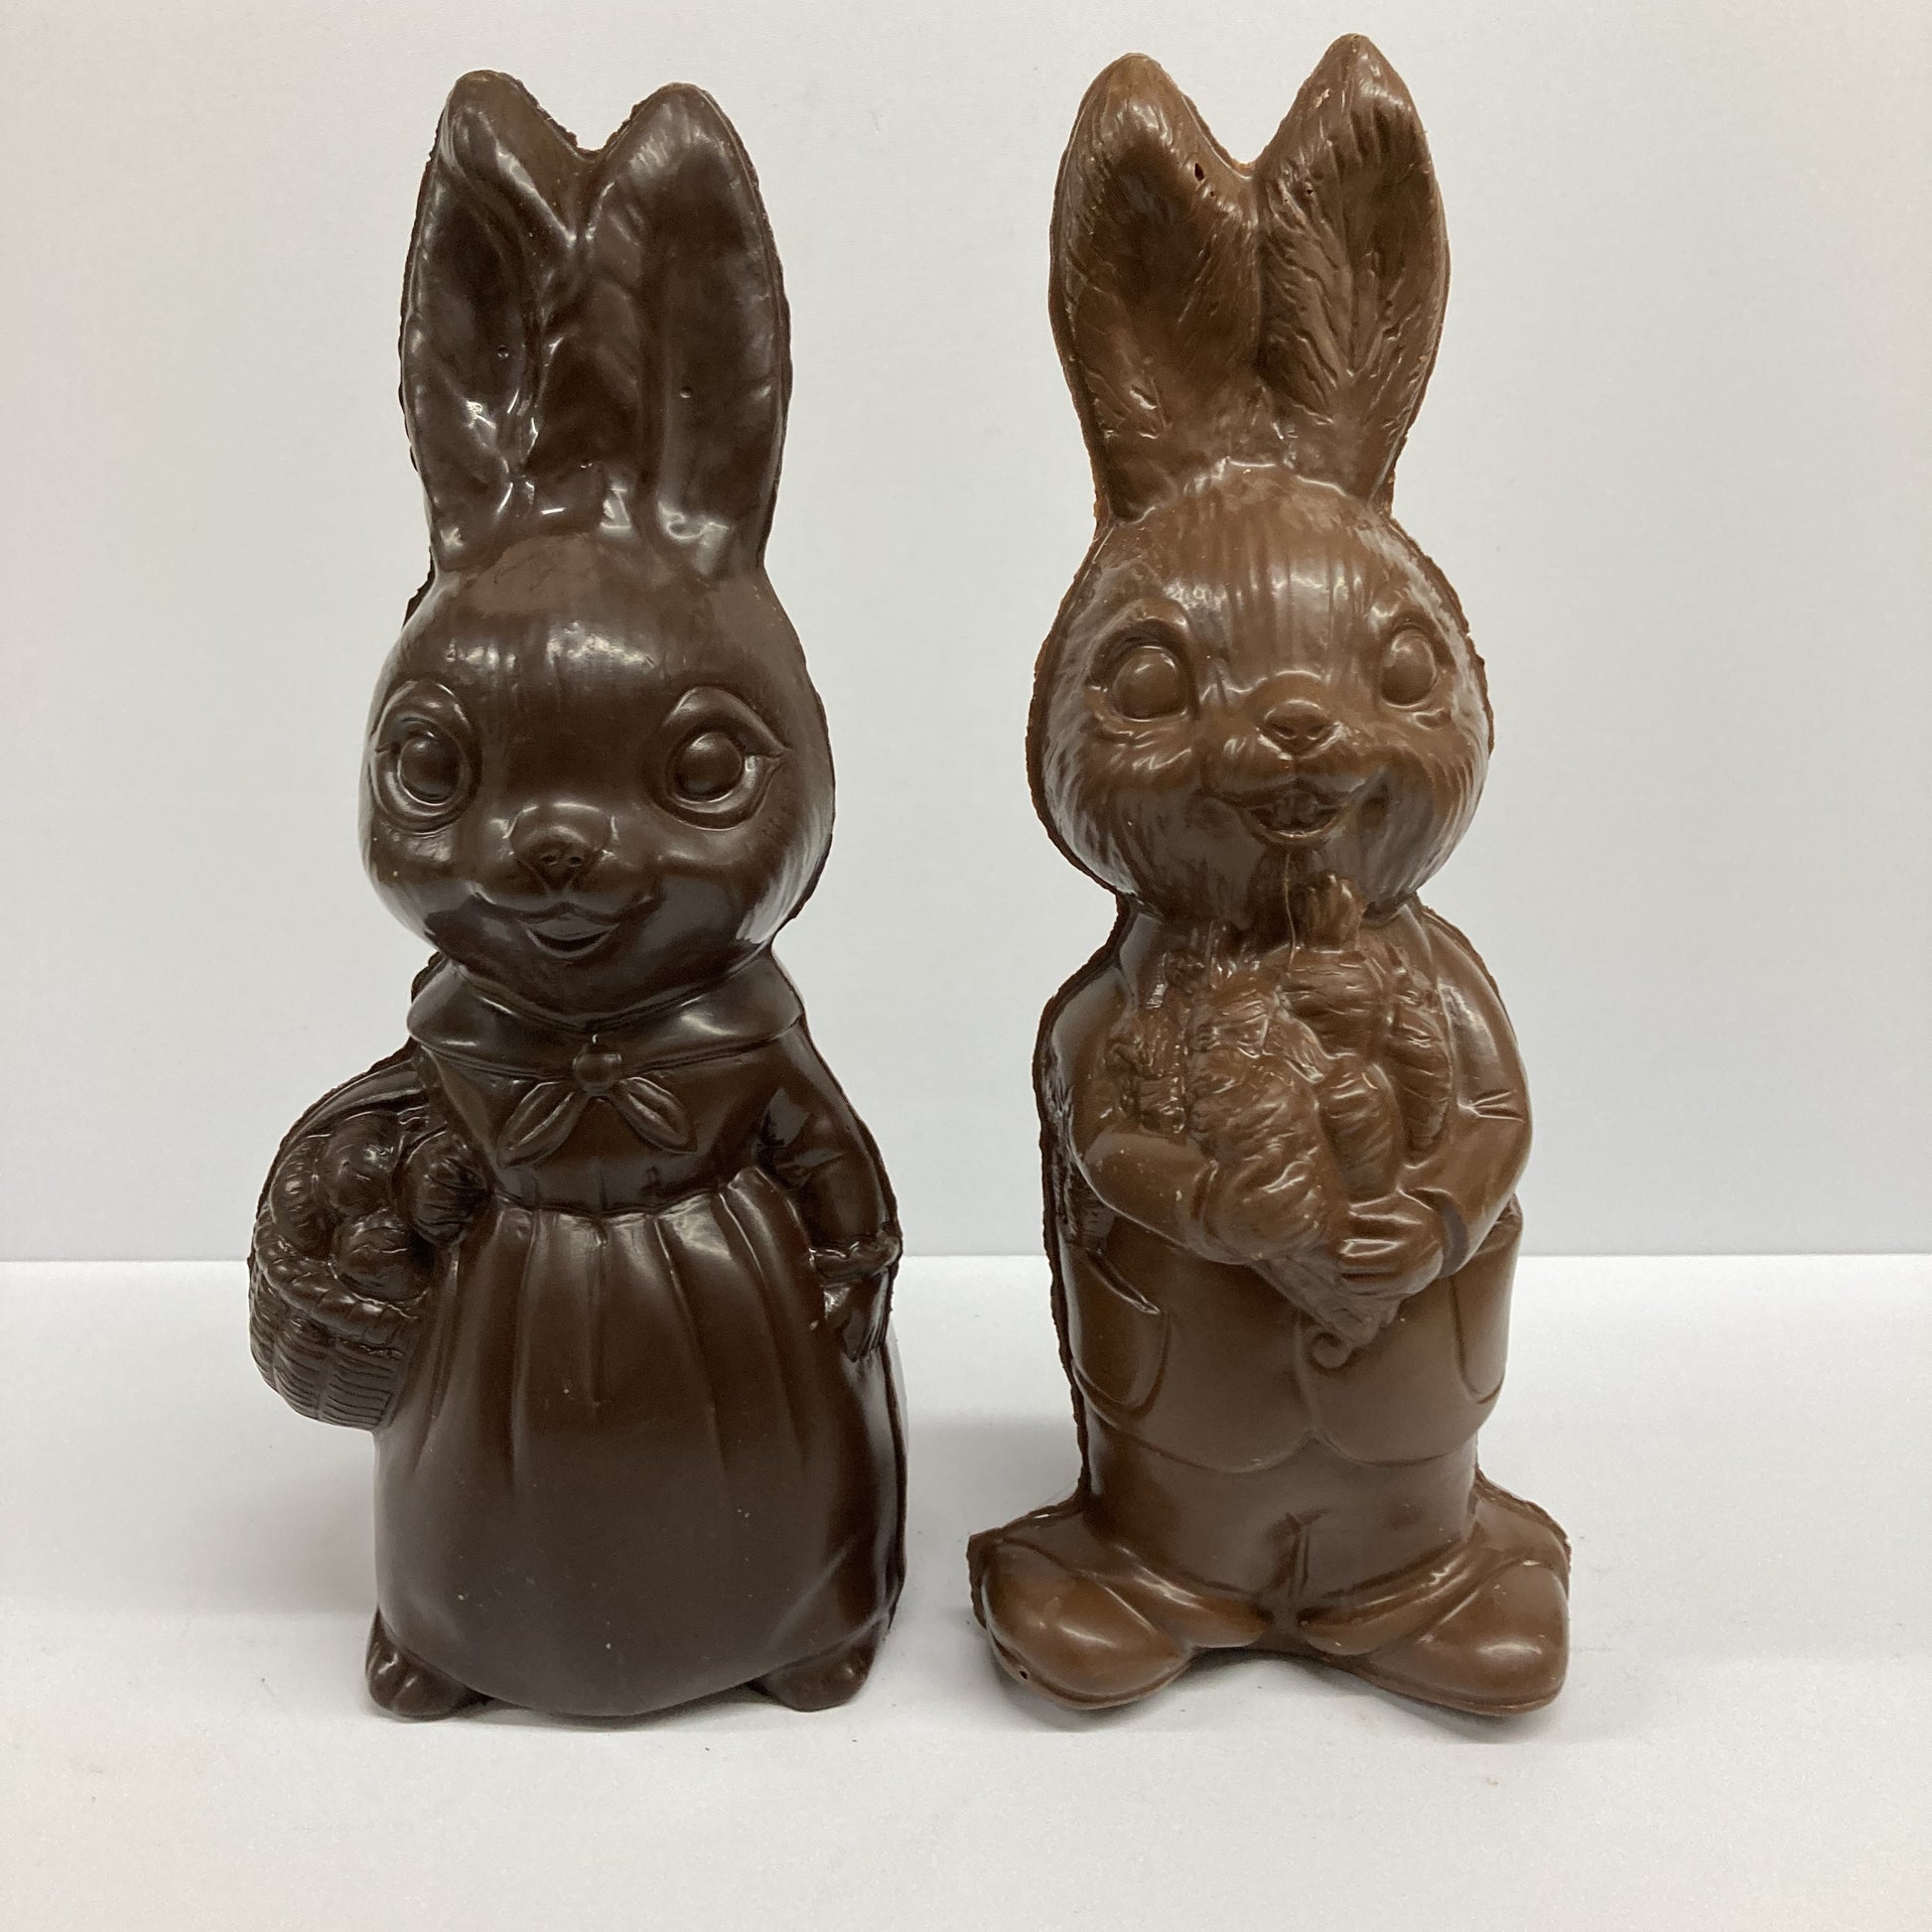 Mrs and Mr Bunny Semi-Solid Chocolate Figures